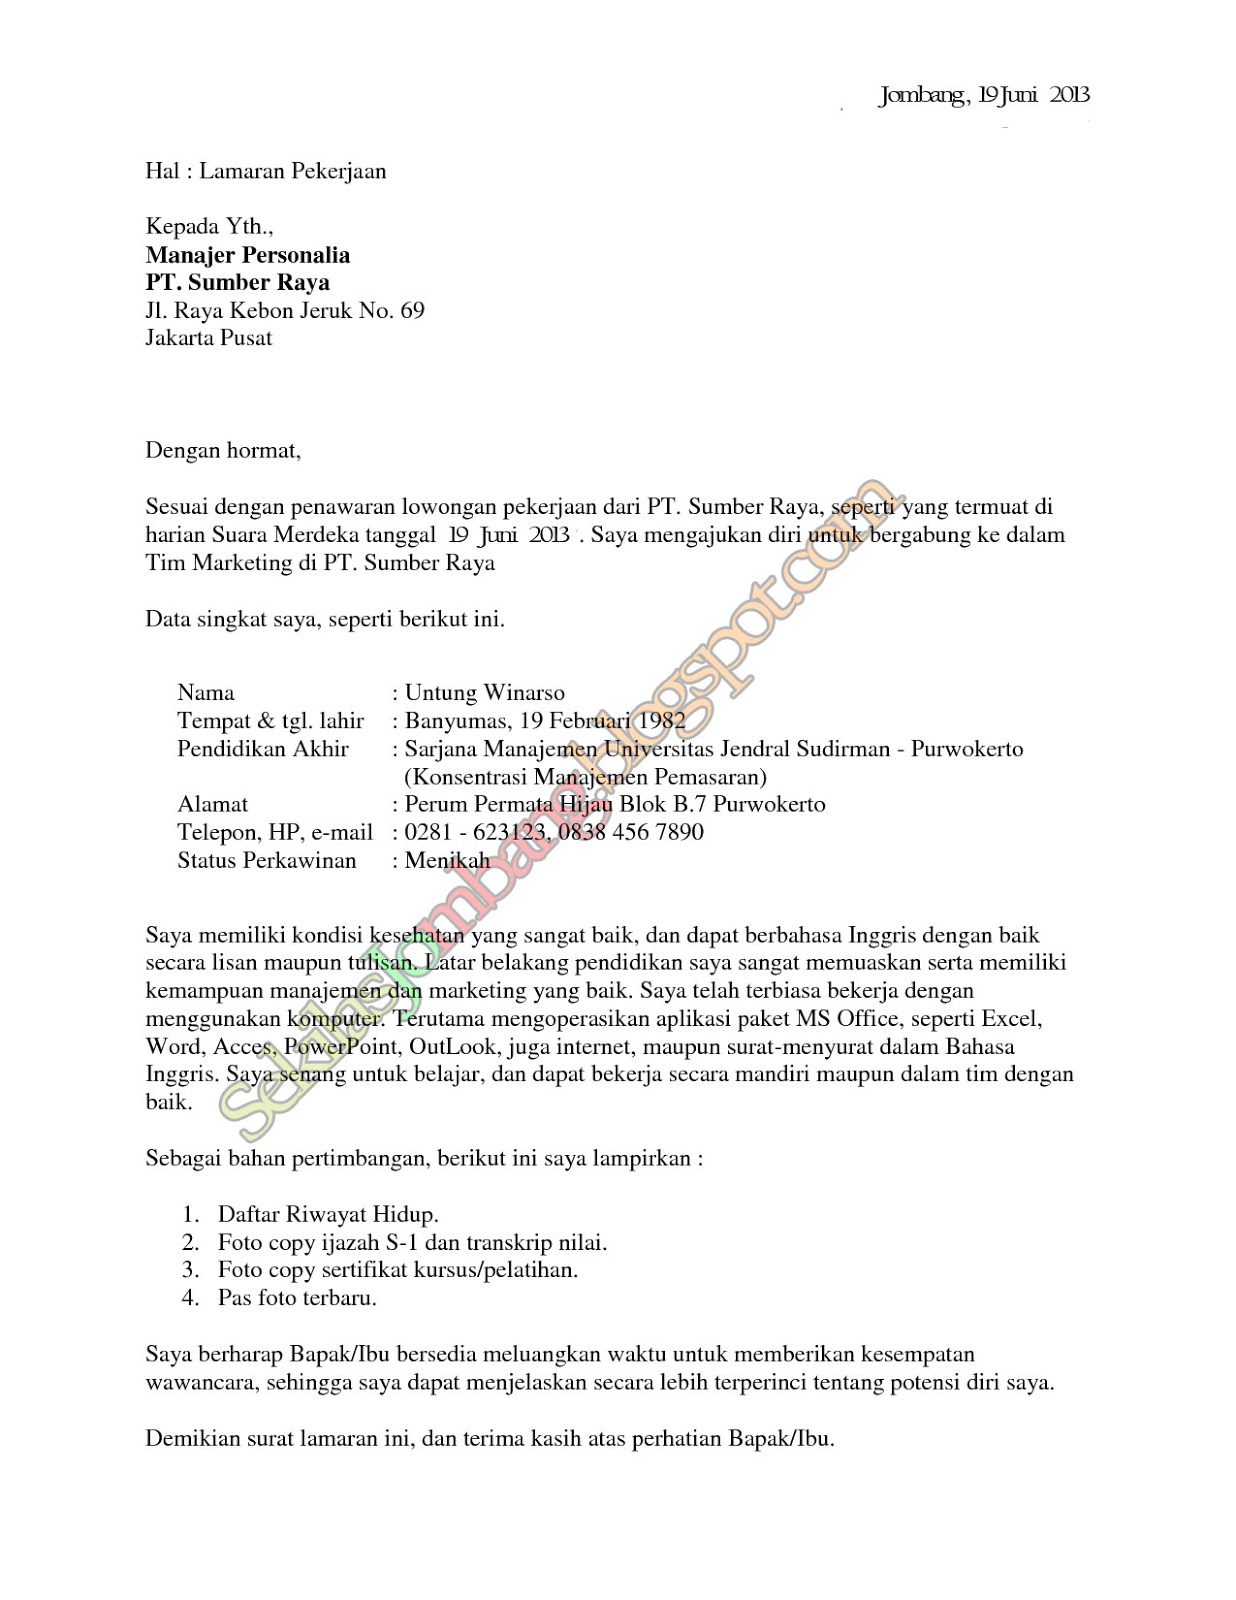 Top Email Cover Letter For Resume Images for Pinterest Tattoos